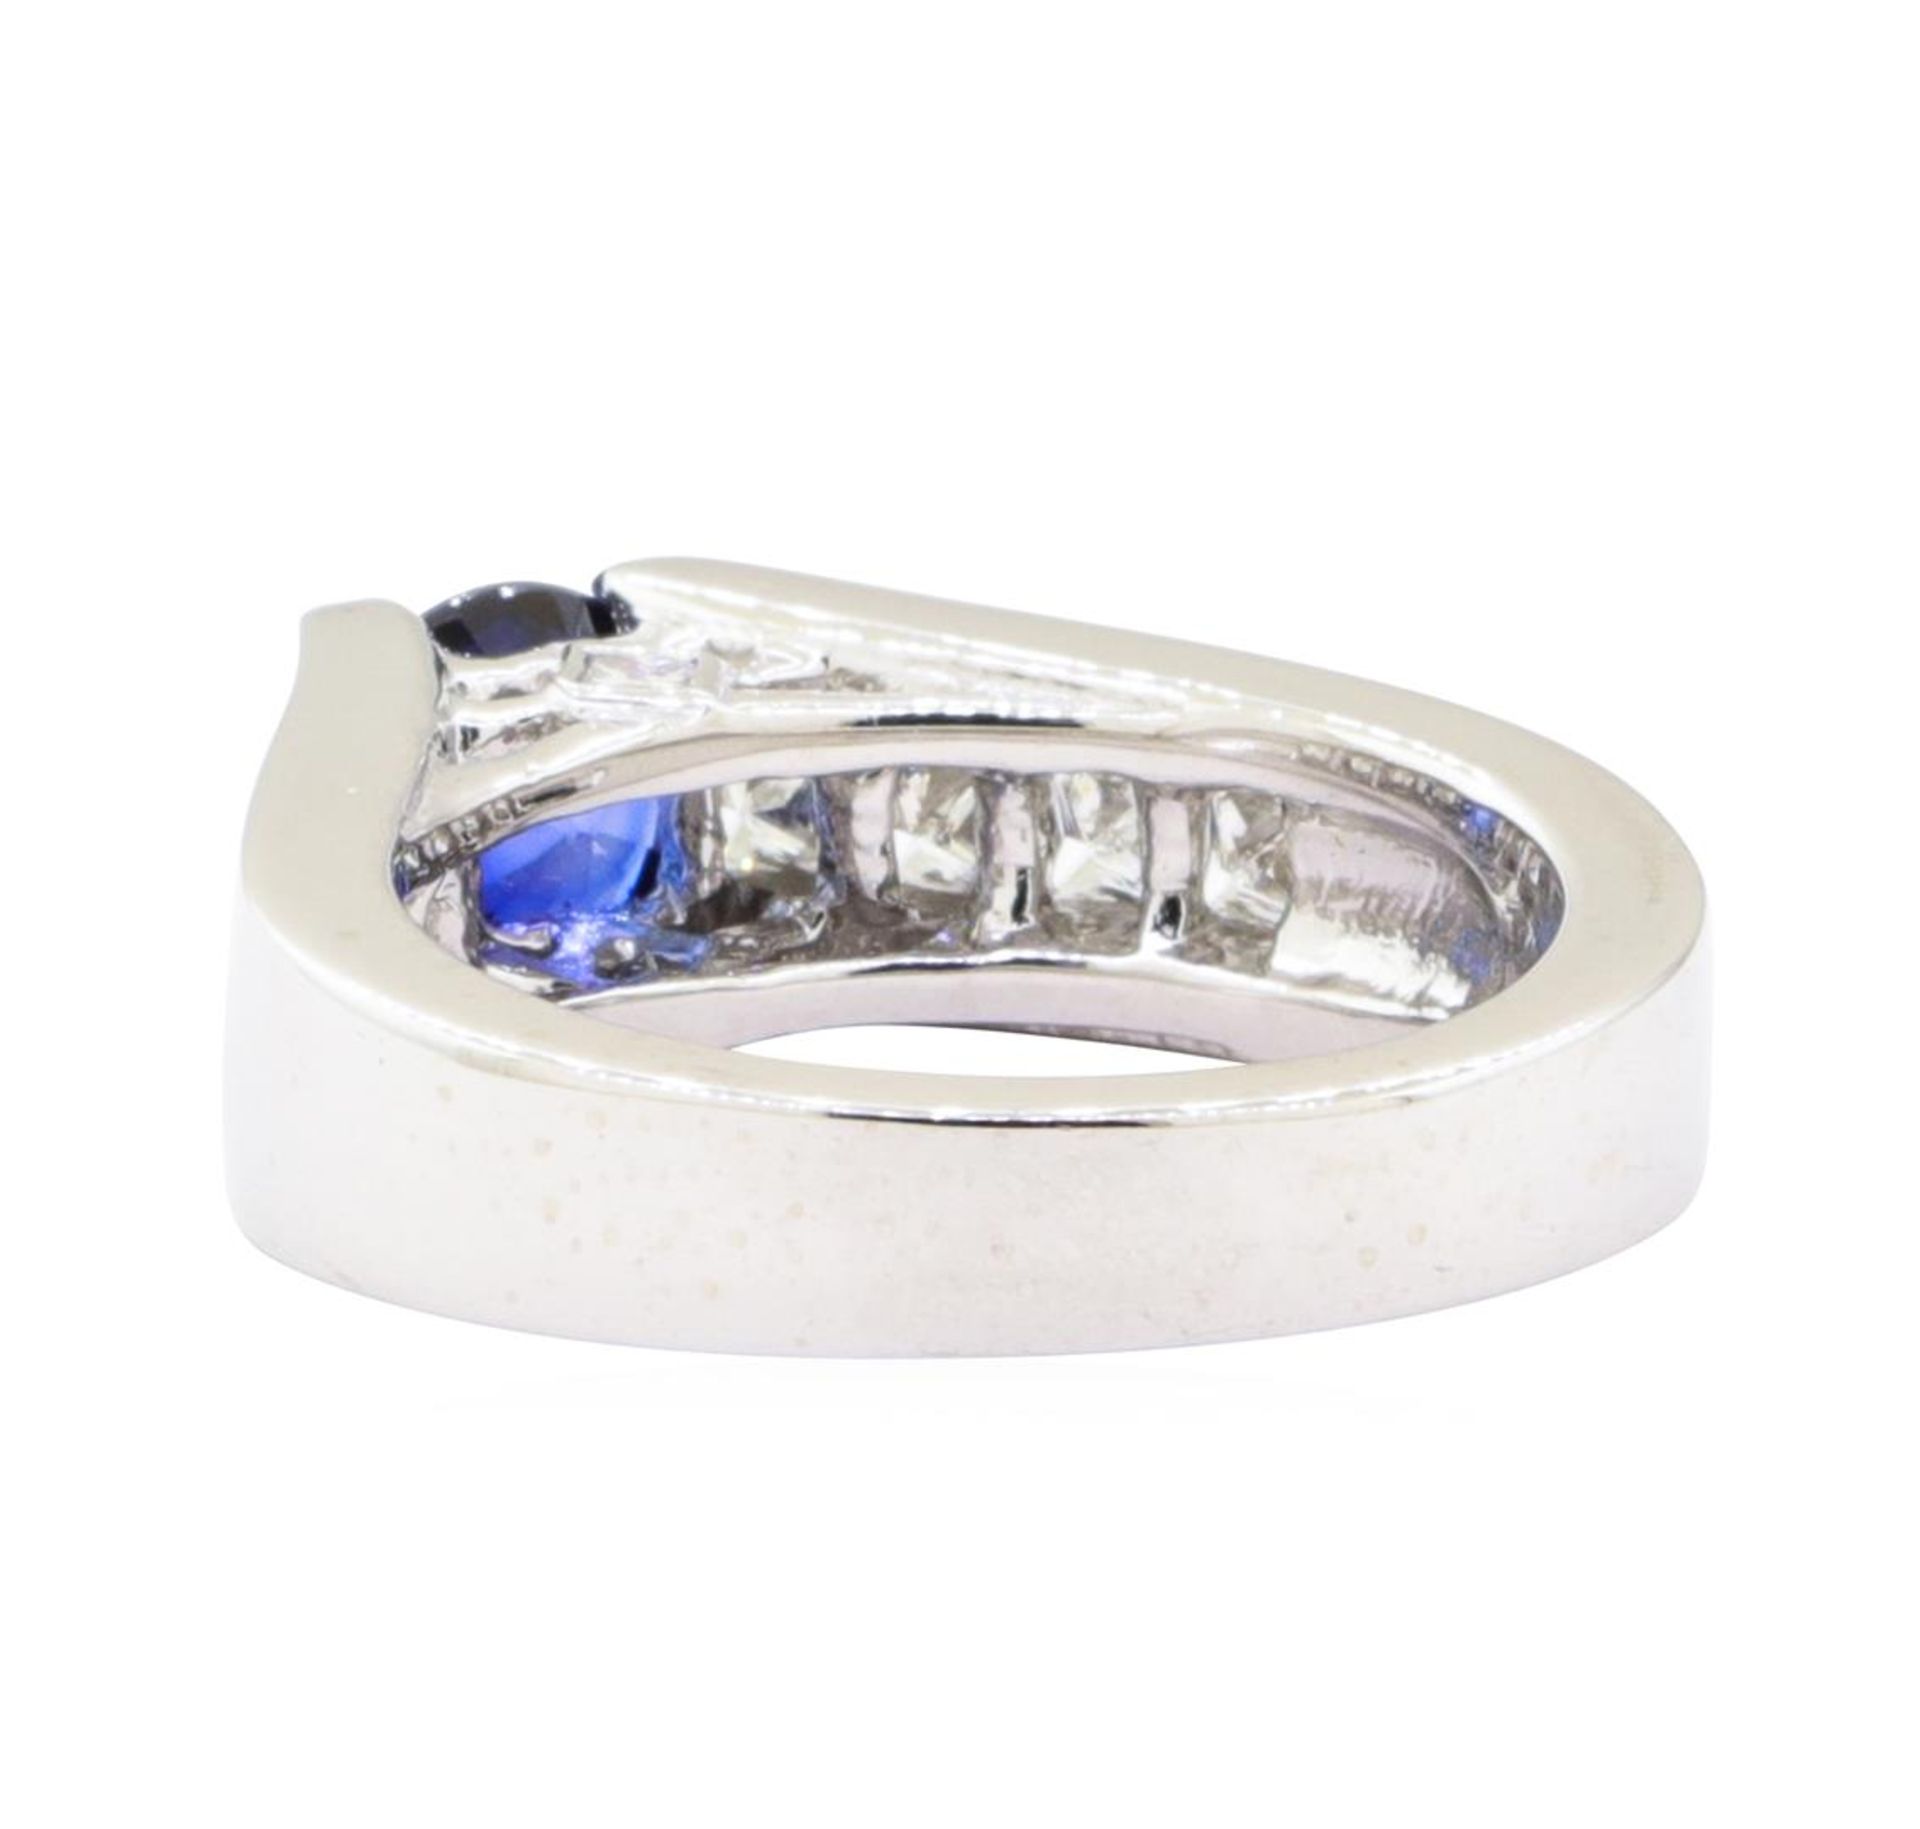 1.99 ctw Sapphire And Diamond Ring - 14KT White Gold - Image 3 of 5